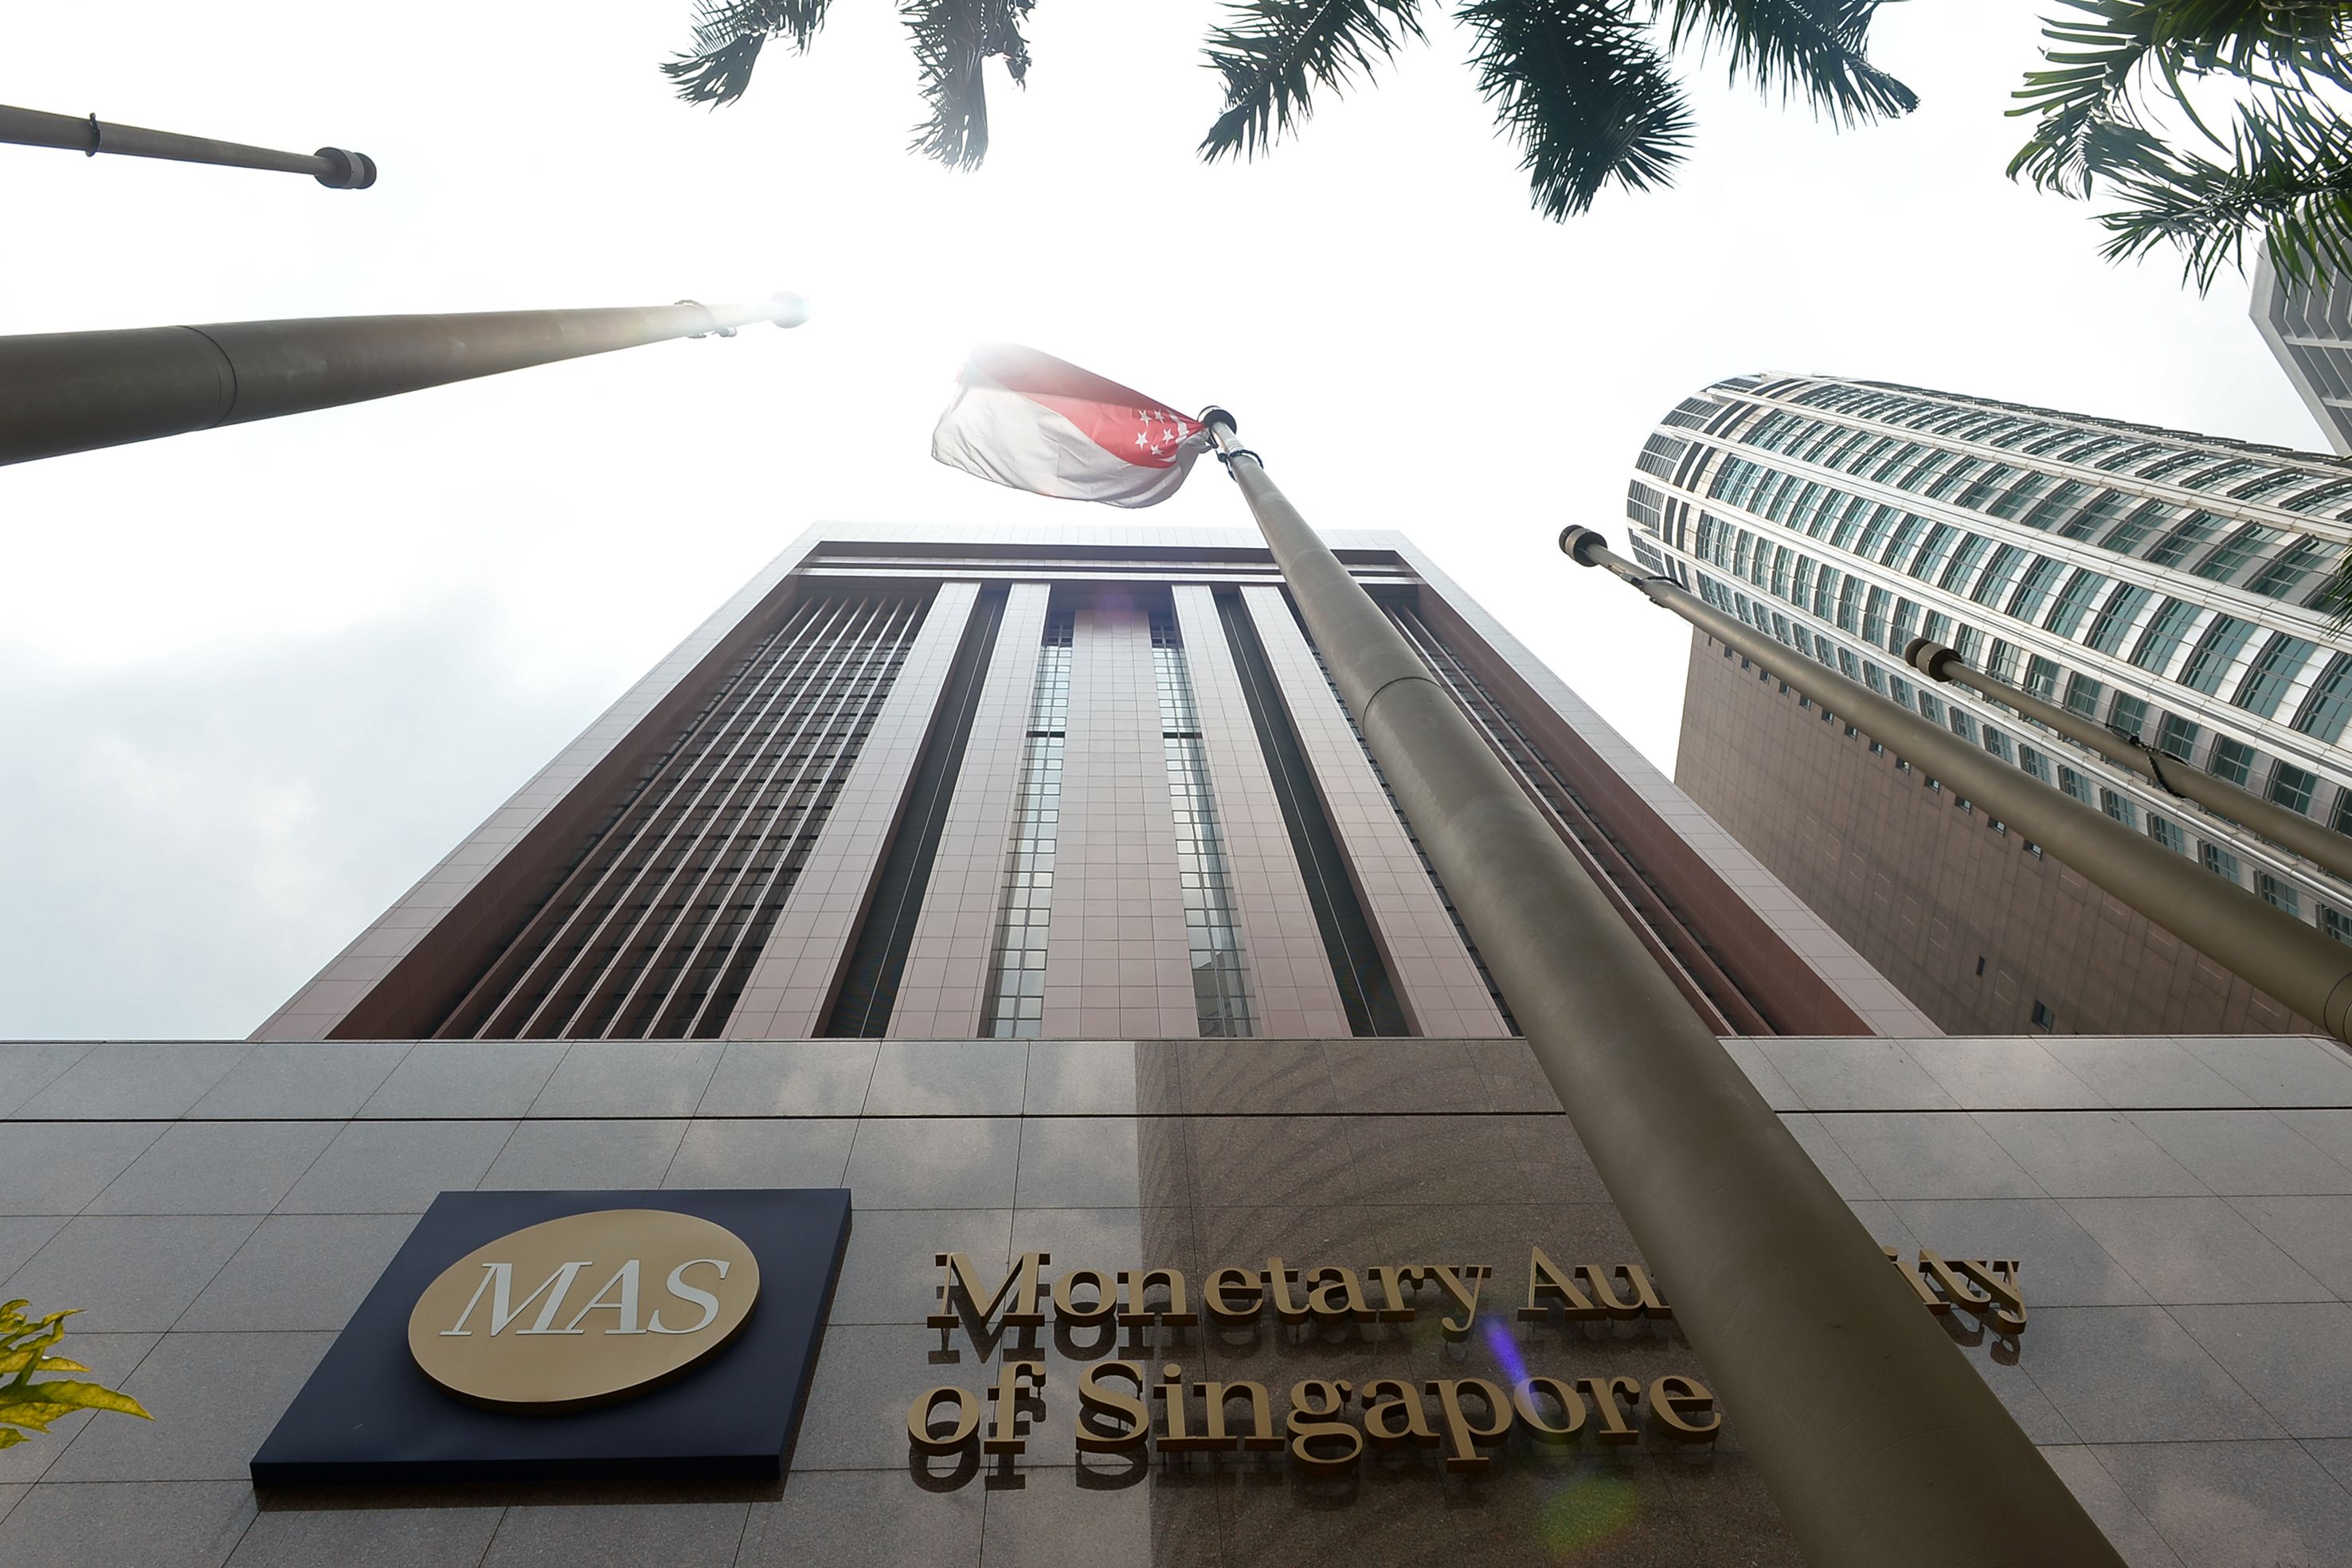 Singapore banks could lose 5% of operating income from disruption: MAS study